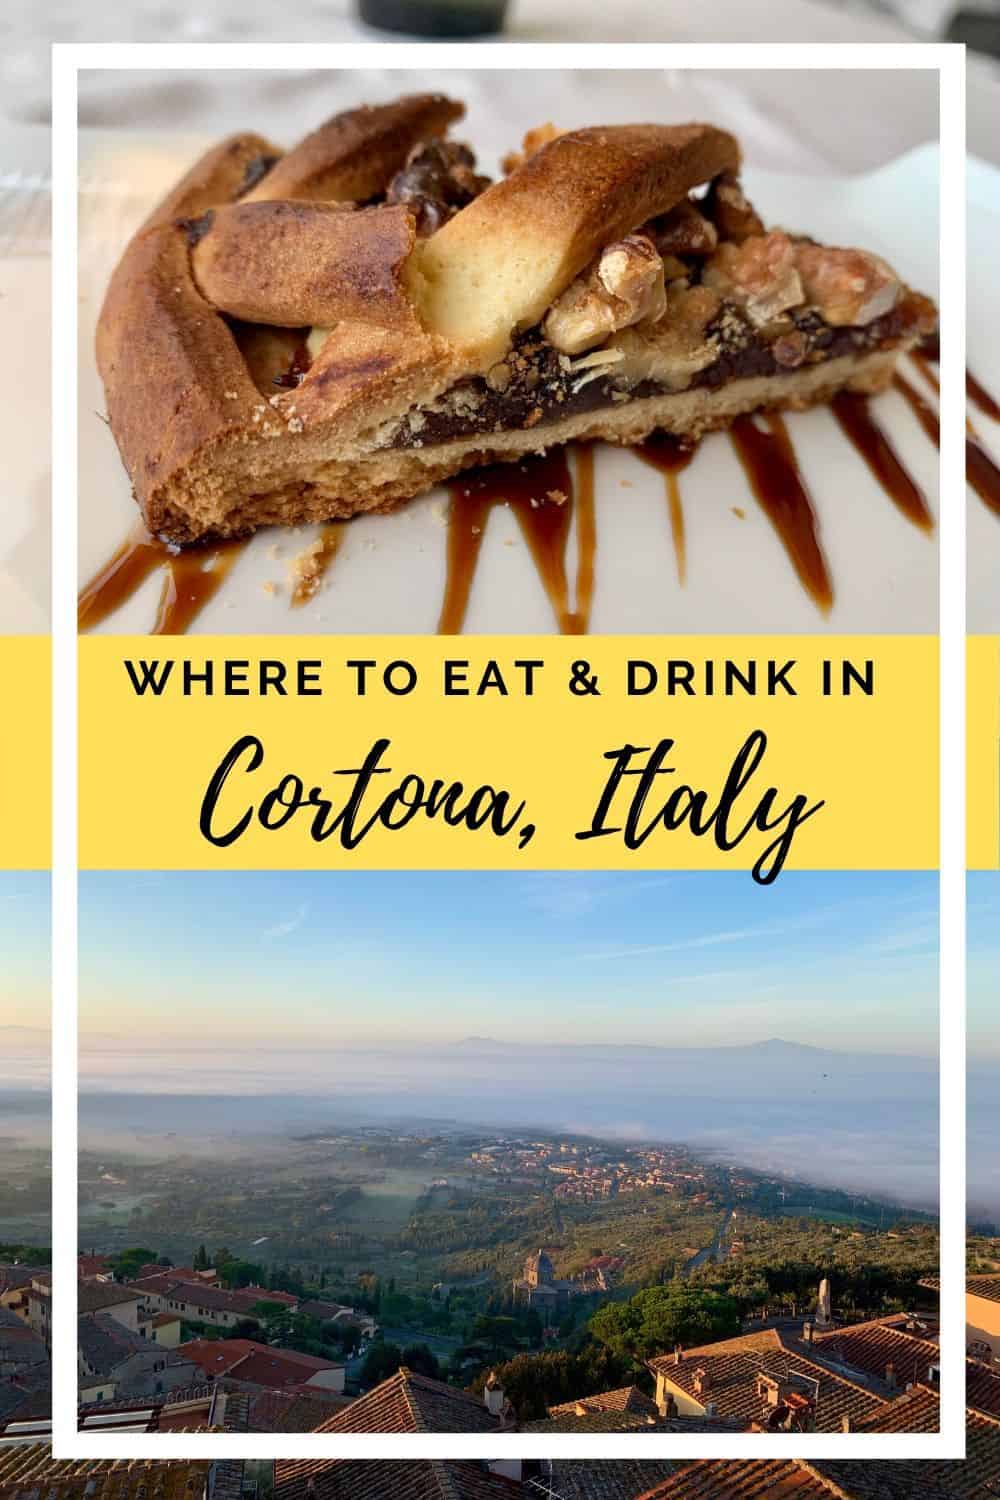 Where to Eat & Drink in Cortona, Italy | This tiny Italian hill town is a foodie's dream! I share the best Cortona restaurants, bars, cafes, and more...and the town is only an hour and a half from Florence. Planning your visit to Cortona, Tuscan hill towns #foodietravel #cortona #italy #tuscany